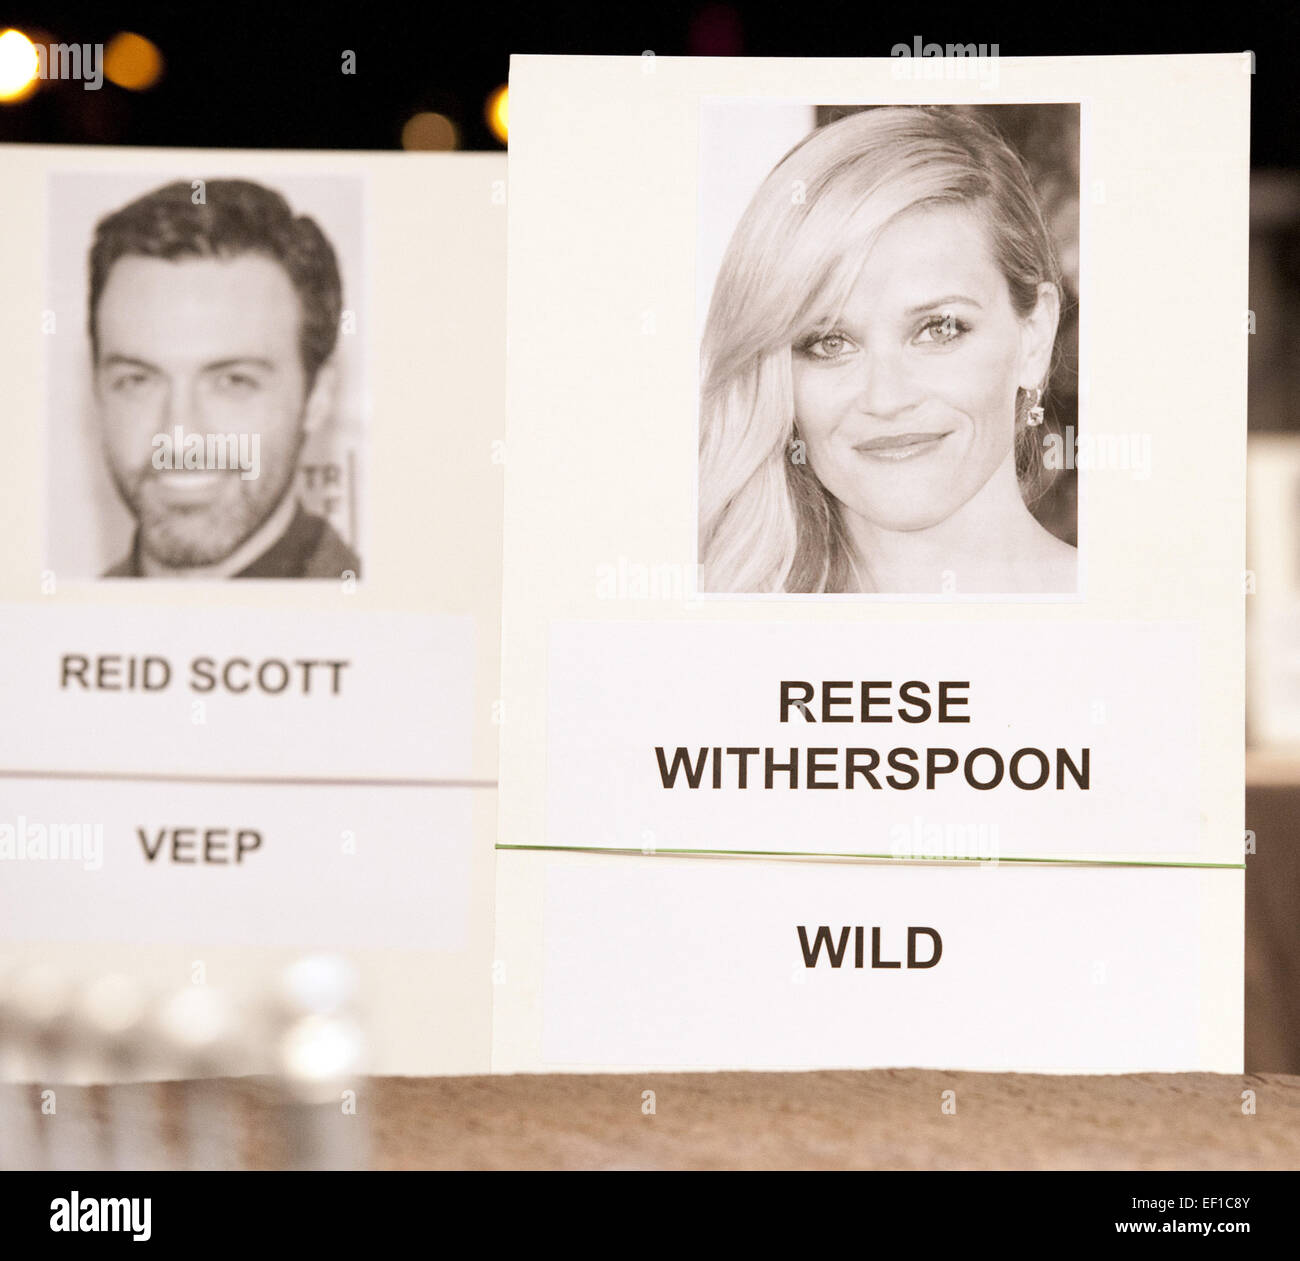 Los Angeles, California, USA. 24th Jan, 2015. SAG Seating Chart--Reese Witherspoon--Wild.--The 21st Annual 2015 Screen Actors Guild Awards preparations were underway at the Shrine Auditorium in Los Angeles as workers set up tents, stages, bleachers and displays on Saturday. American actor Matt McGorry, 'Orange is the New Black' nominee, led the ceremonial rolling out of the red carpet with Local 33 Props and Carpenters, Local 800, Art Directors as well as Sag Award Committee Vice Chair Daryl Anderson and American actor Woody Schultz. Inside the Shrine Auditorium stand ins rehearsed award pr Stock Photo